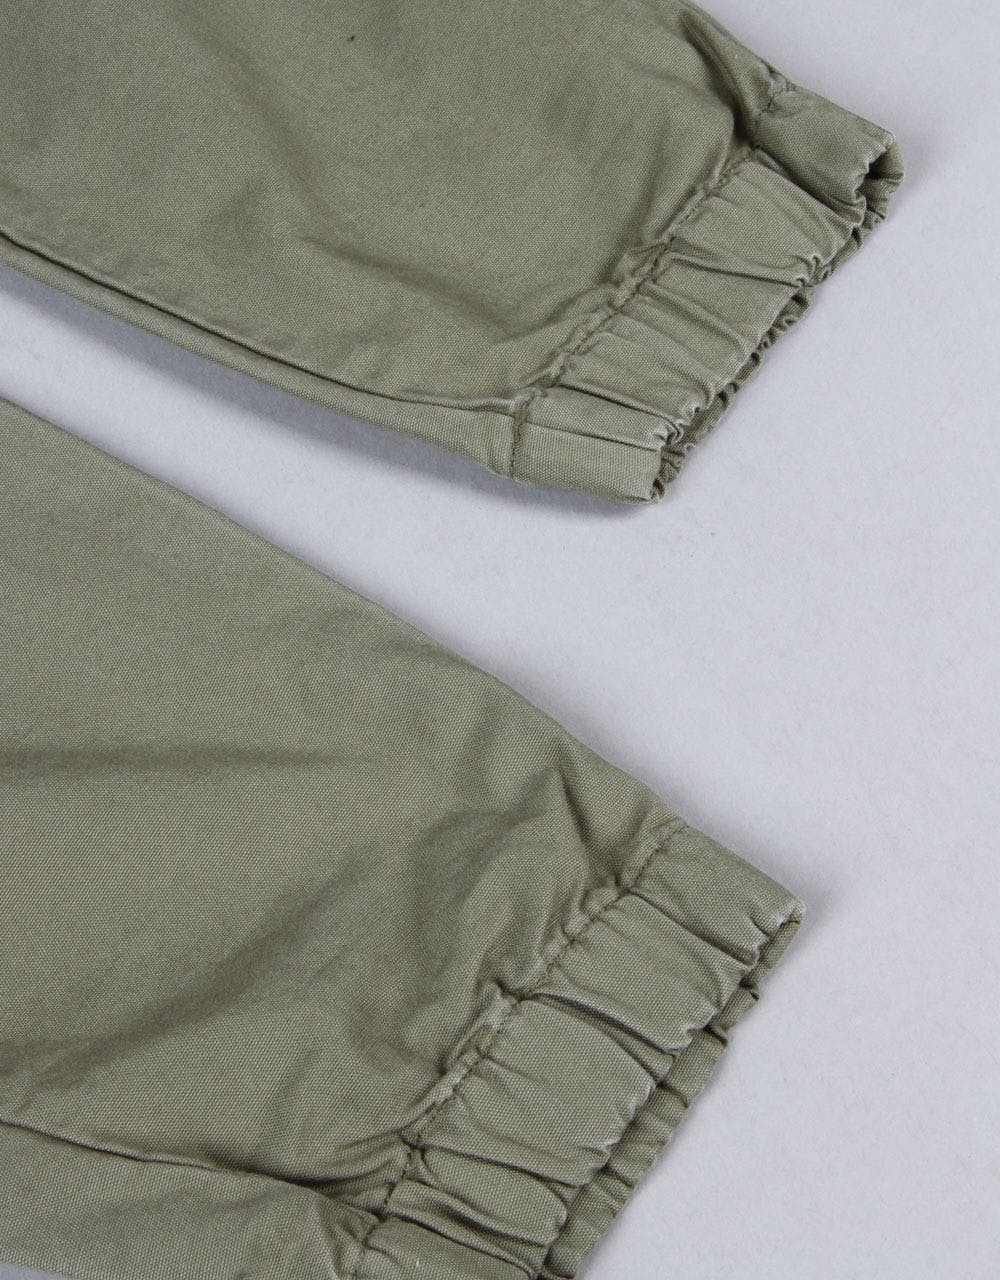 Route One Cuffed Chinos - Olive